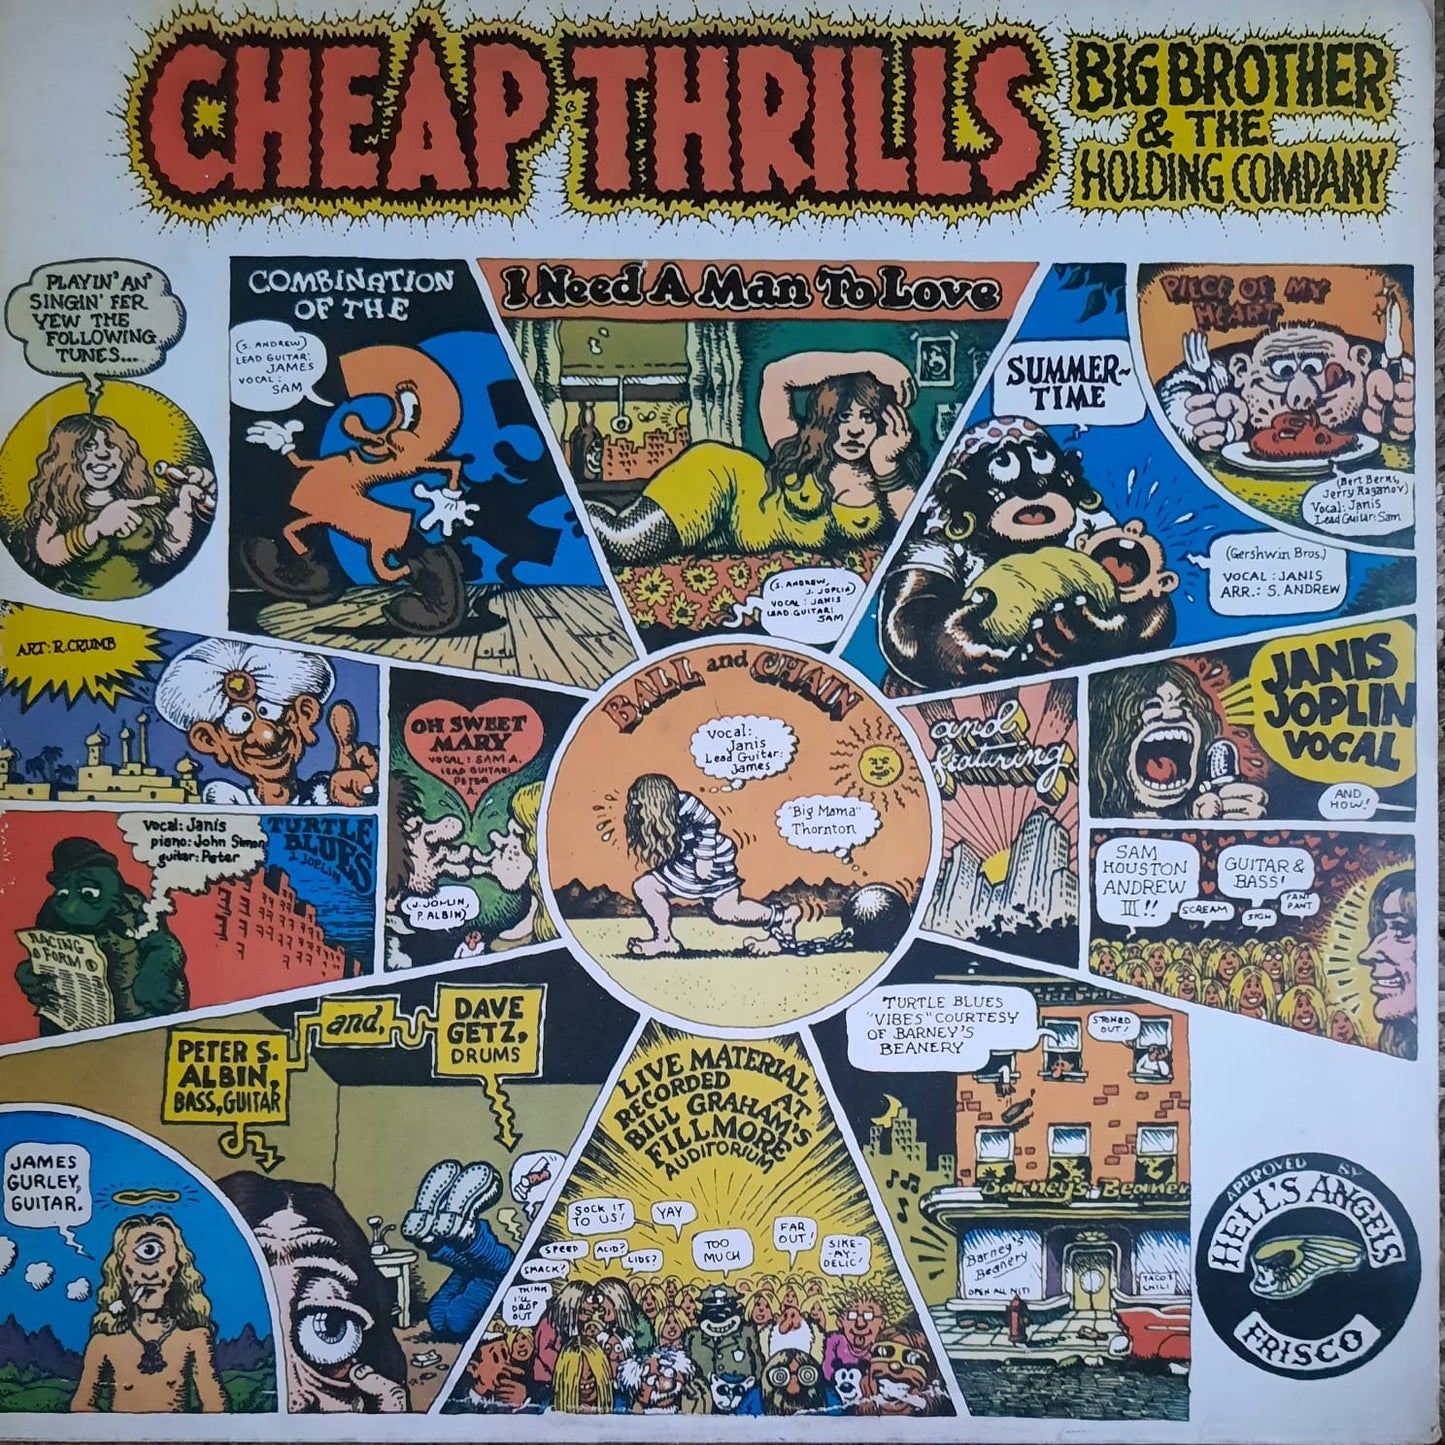 Big Brother & The Holding Company - Cheap Thrills (LP, Europa, 1982)